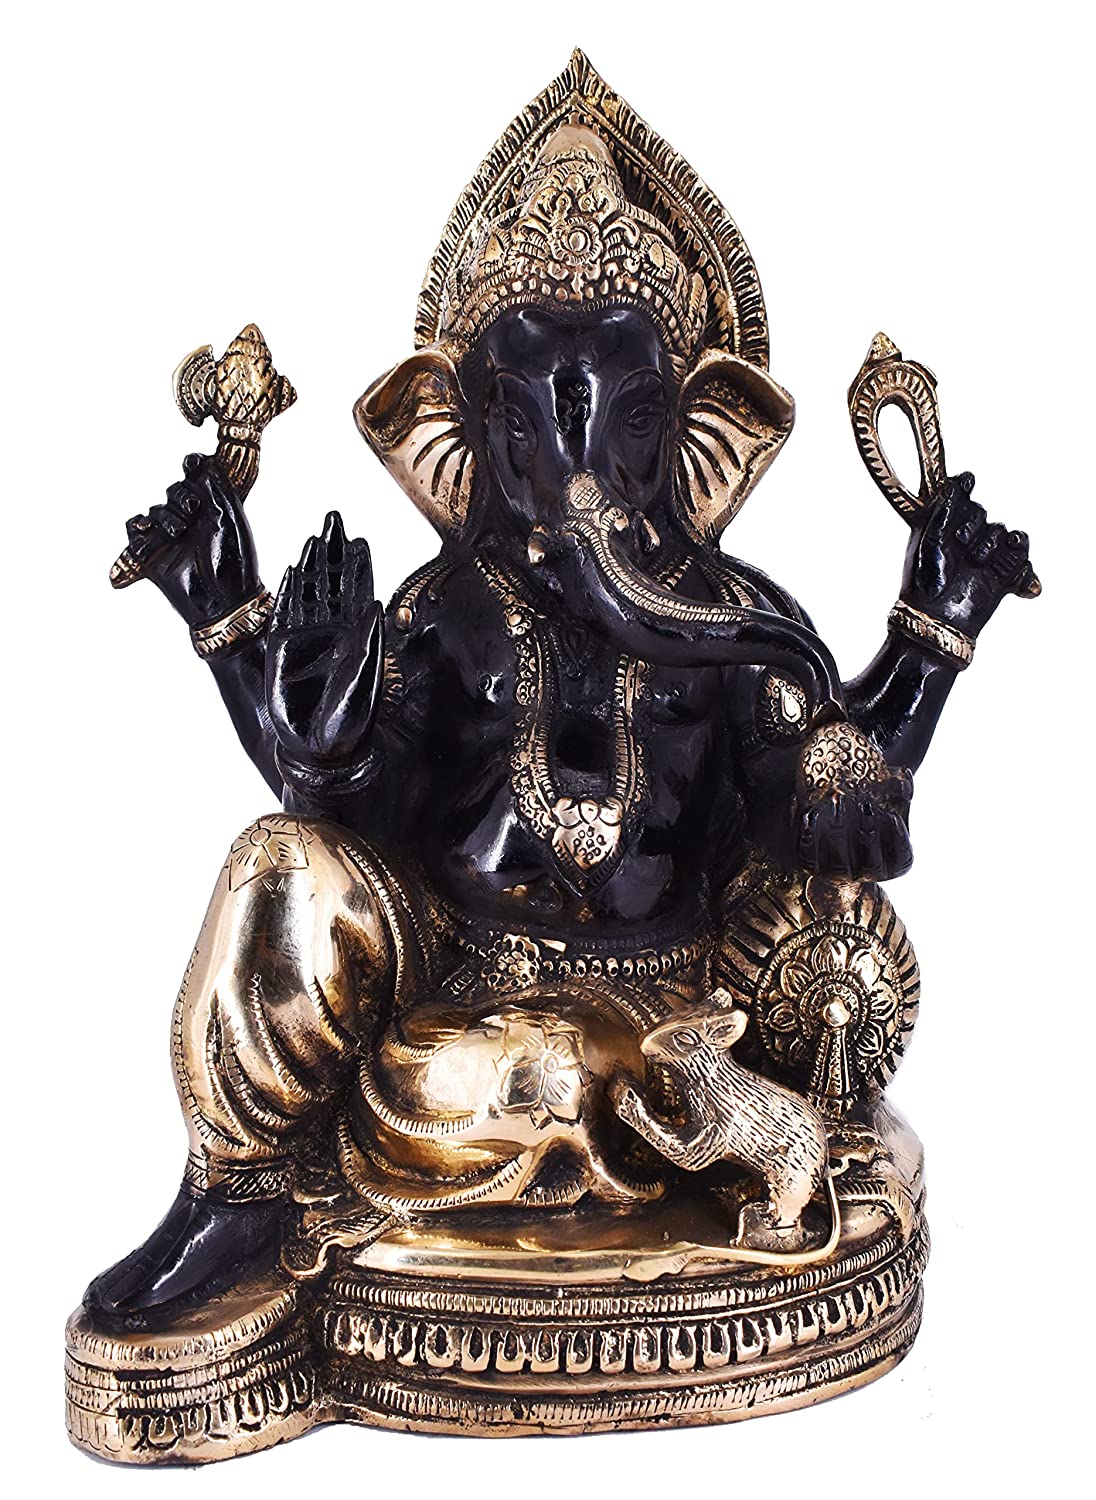 Buy Lord Ganesha Idols for Gift Home Decor Pooja - Big Ganesh Statue -  Standing God Ganpati Showpiece Online at Low Prices in India - Amazon.in